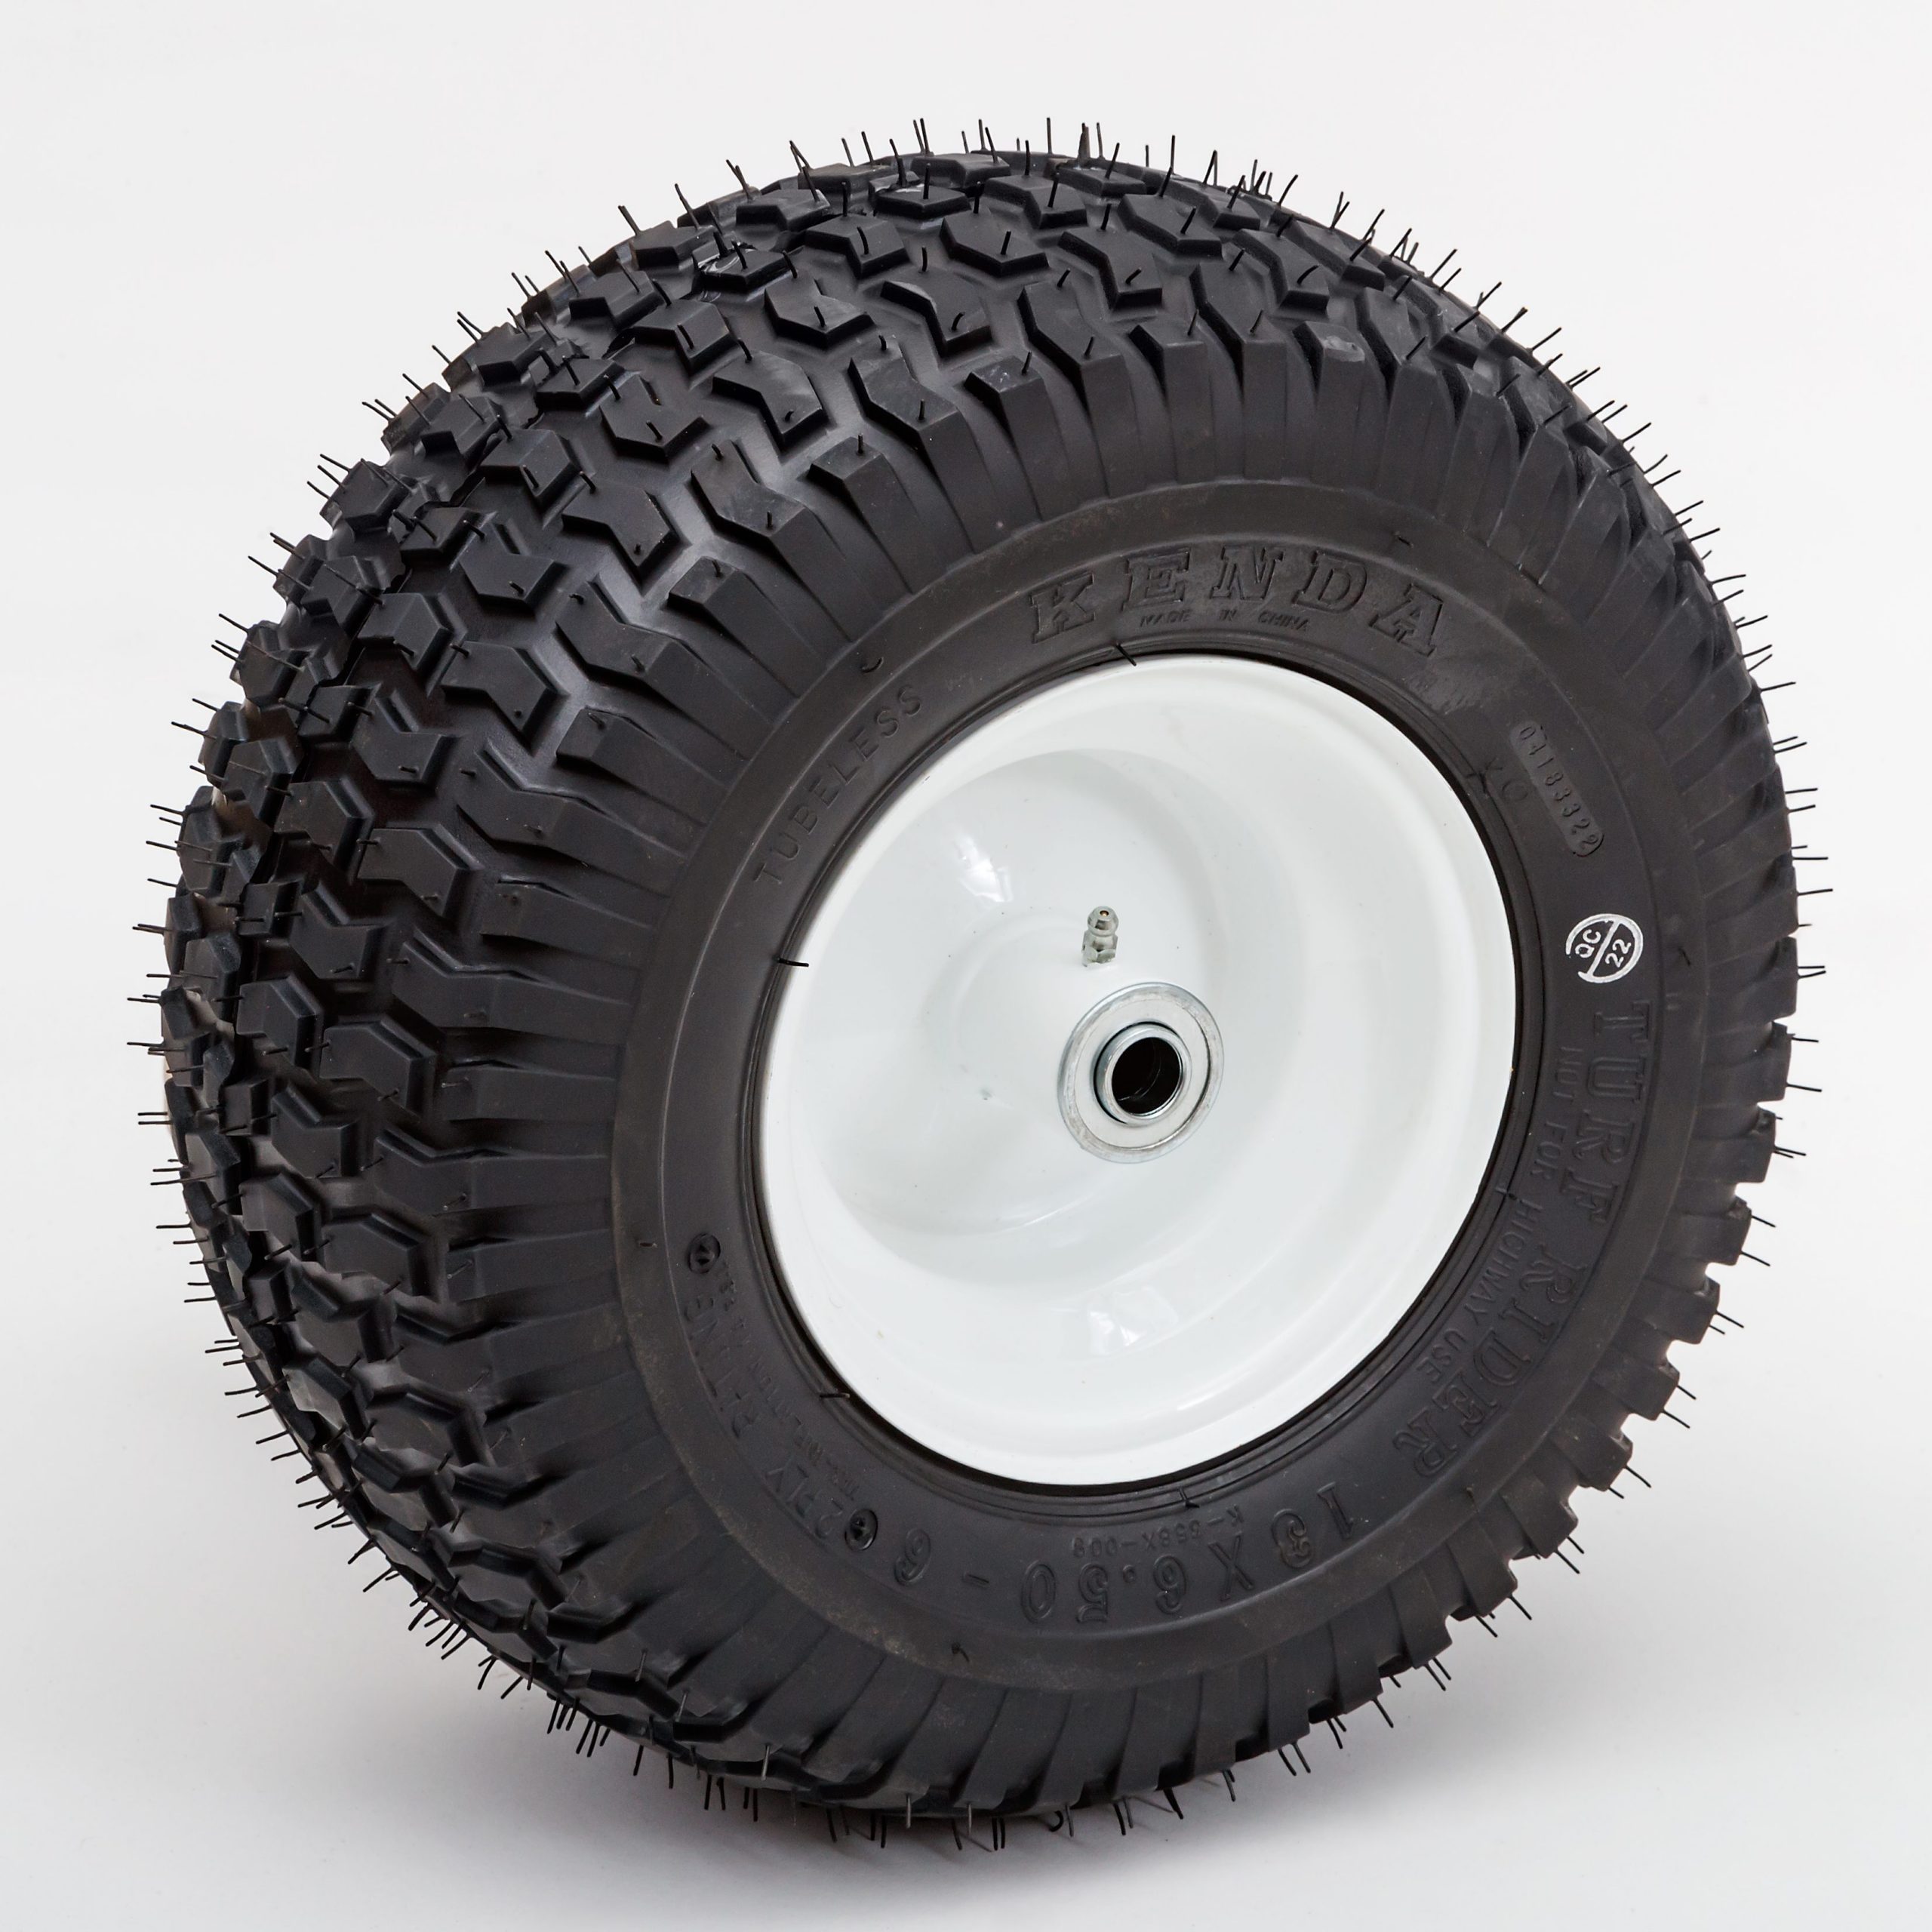 Tire Replacement 8 Wheel Pneumatic Air Filled Tire 3.50-8 Replacement Wheelbarrow Wheels 15 